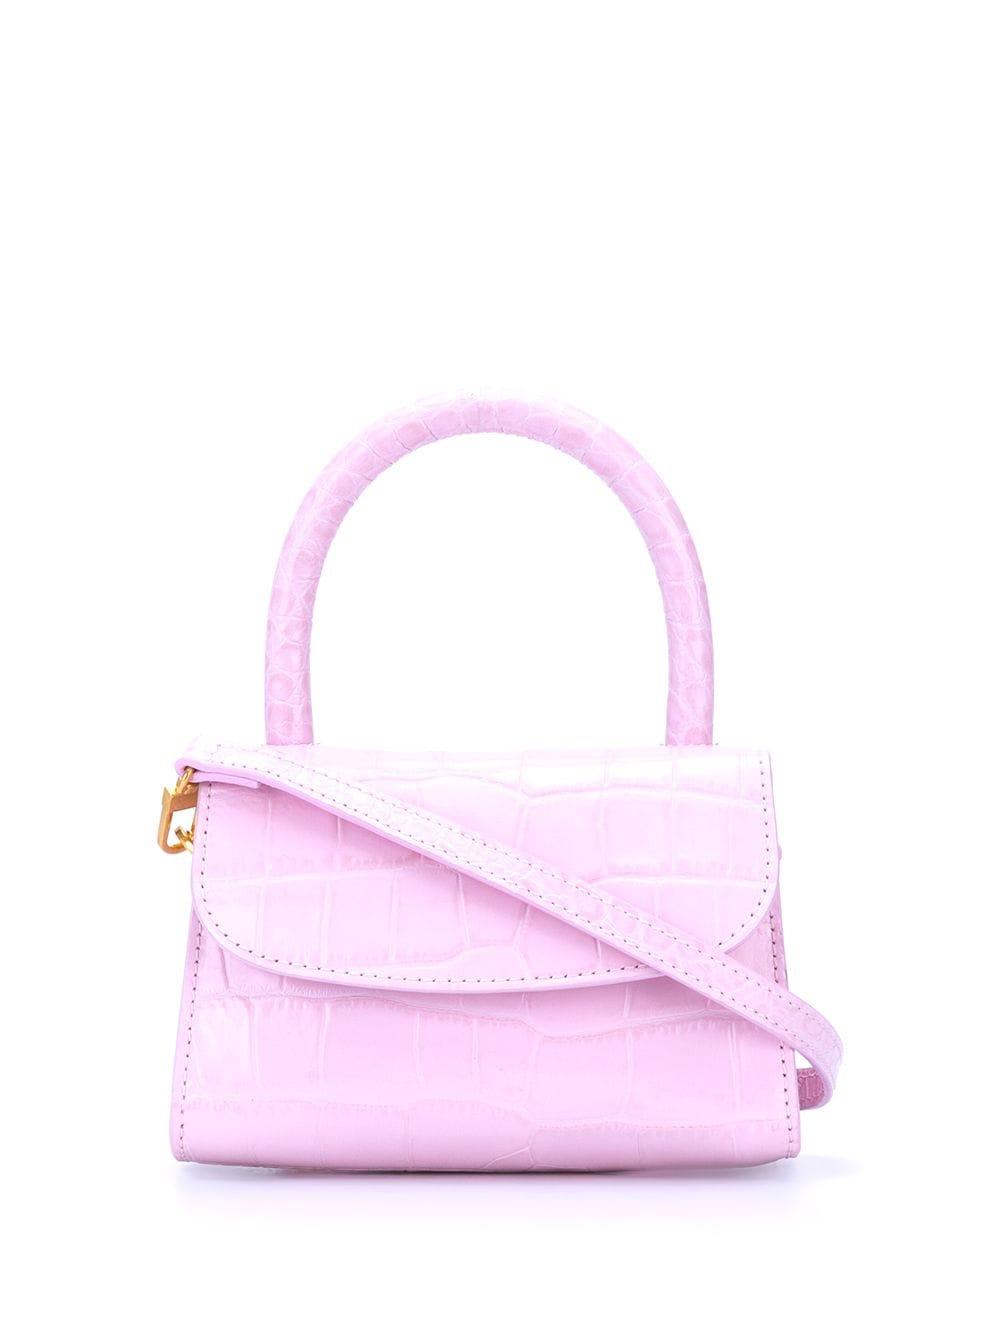 BY FAR Leather Crocodile-embossed Tote Bag in Pink - Lyst